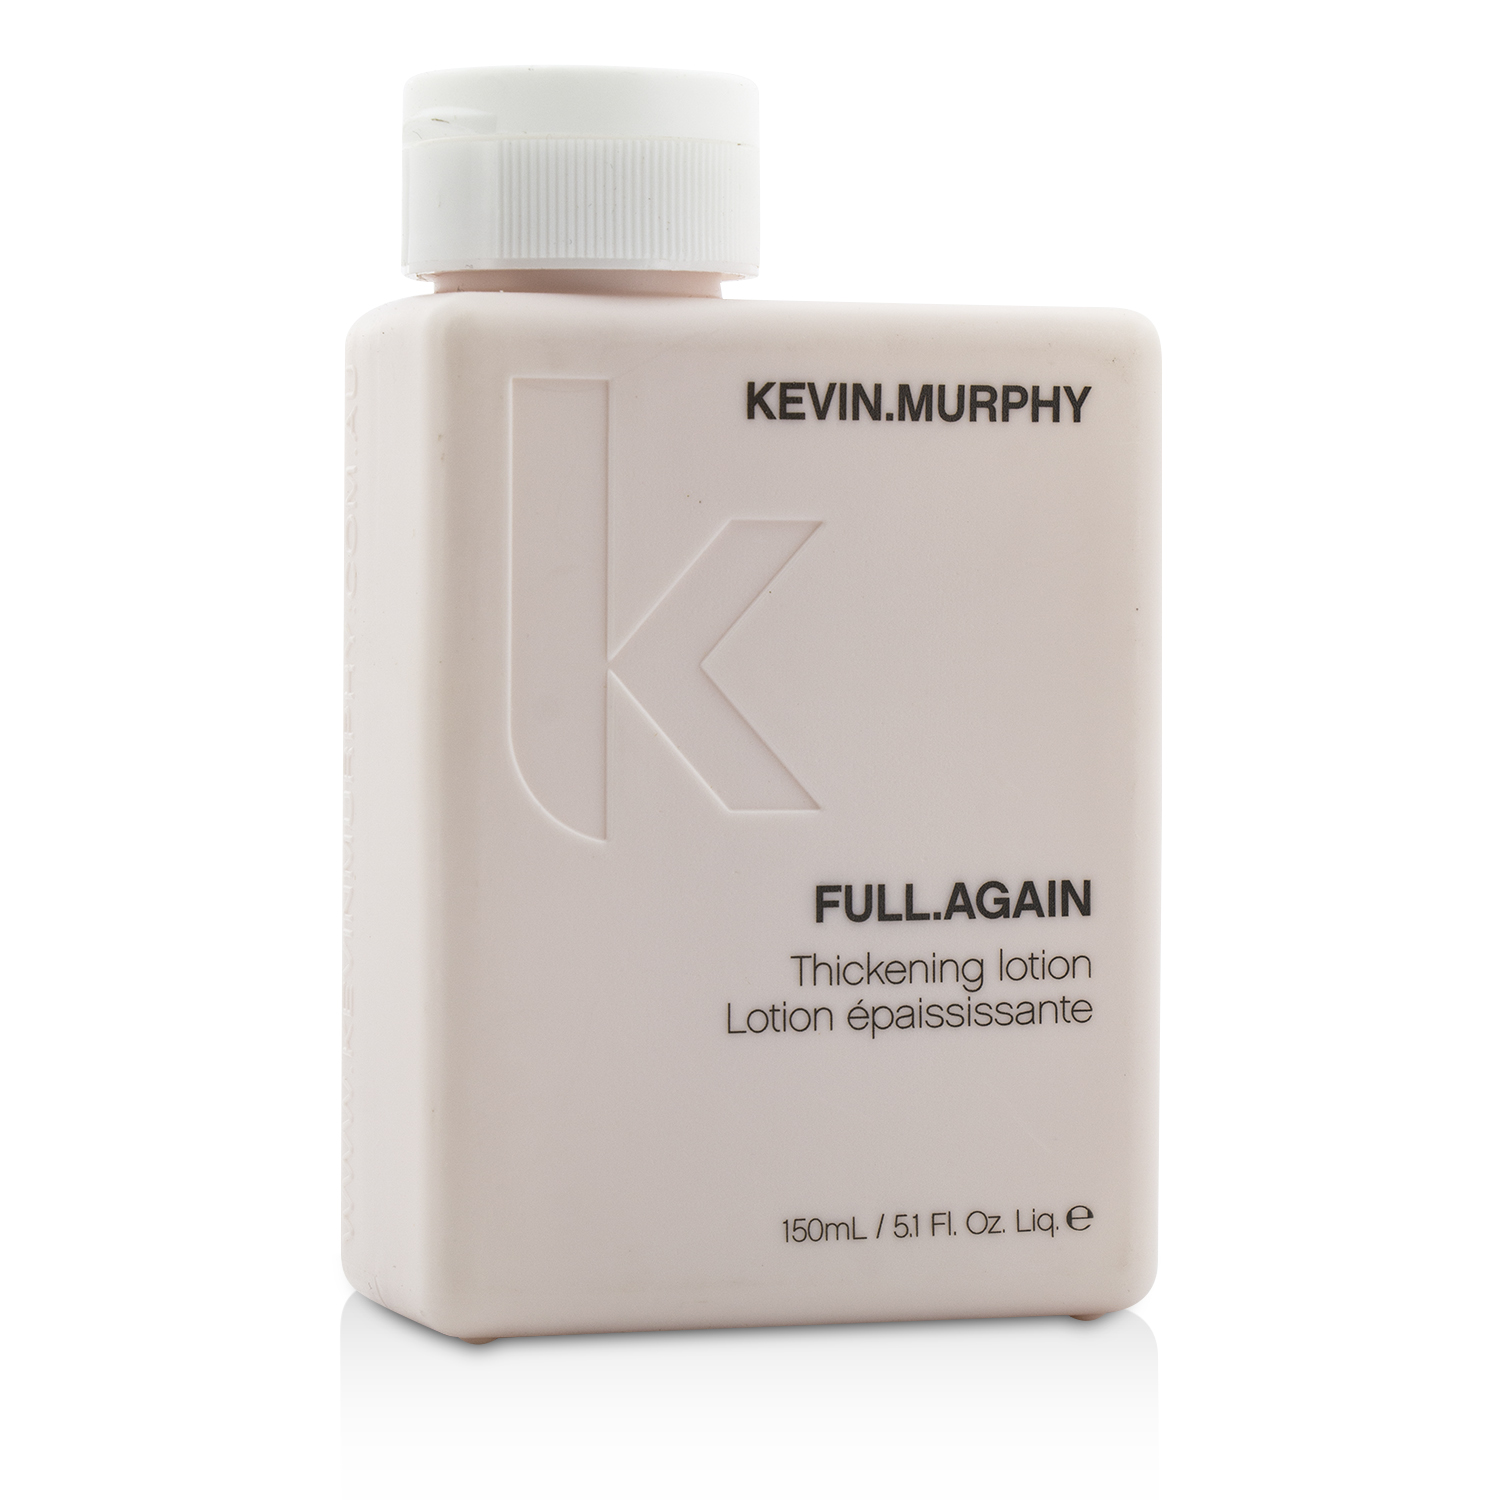 Full.Again Thickening Lotion Kevin.Murphy Image